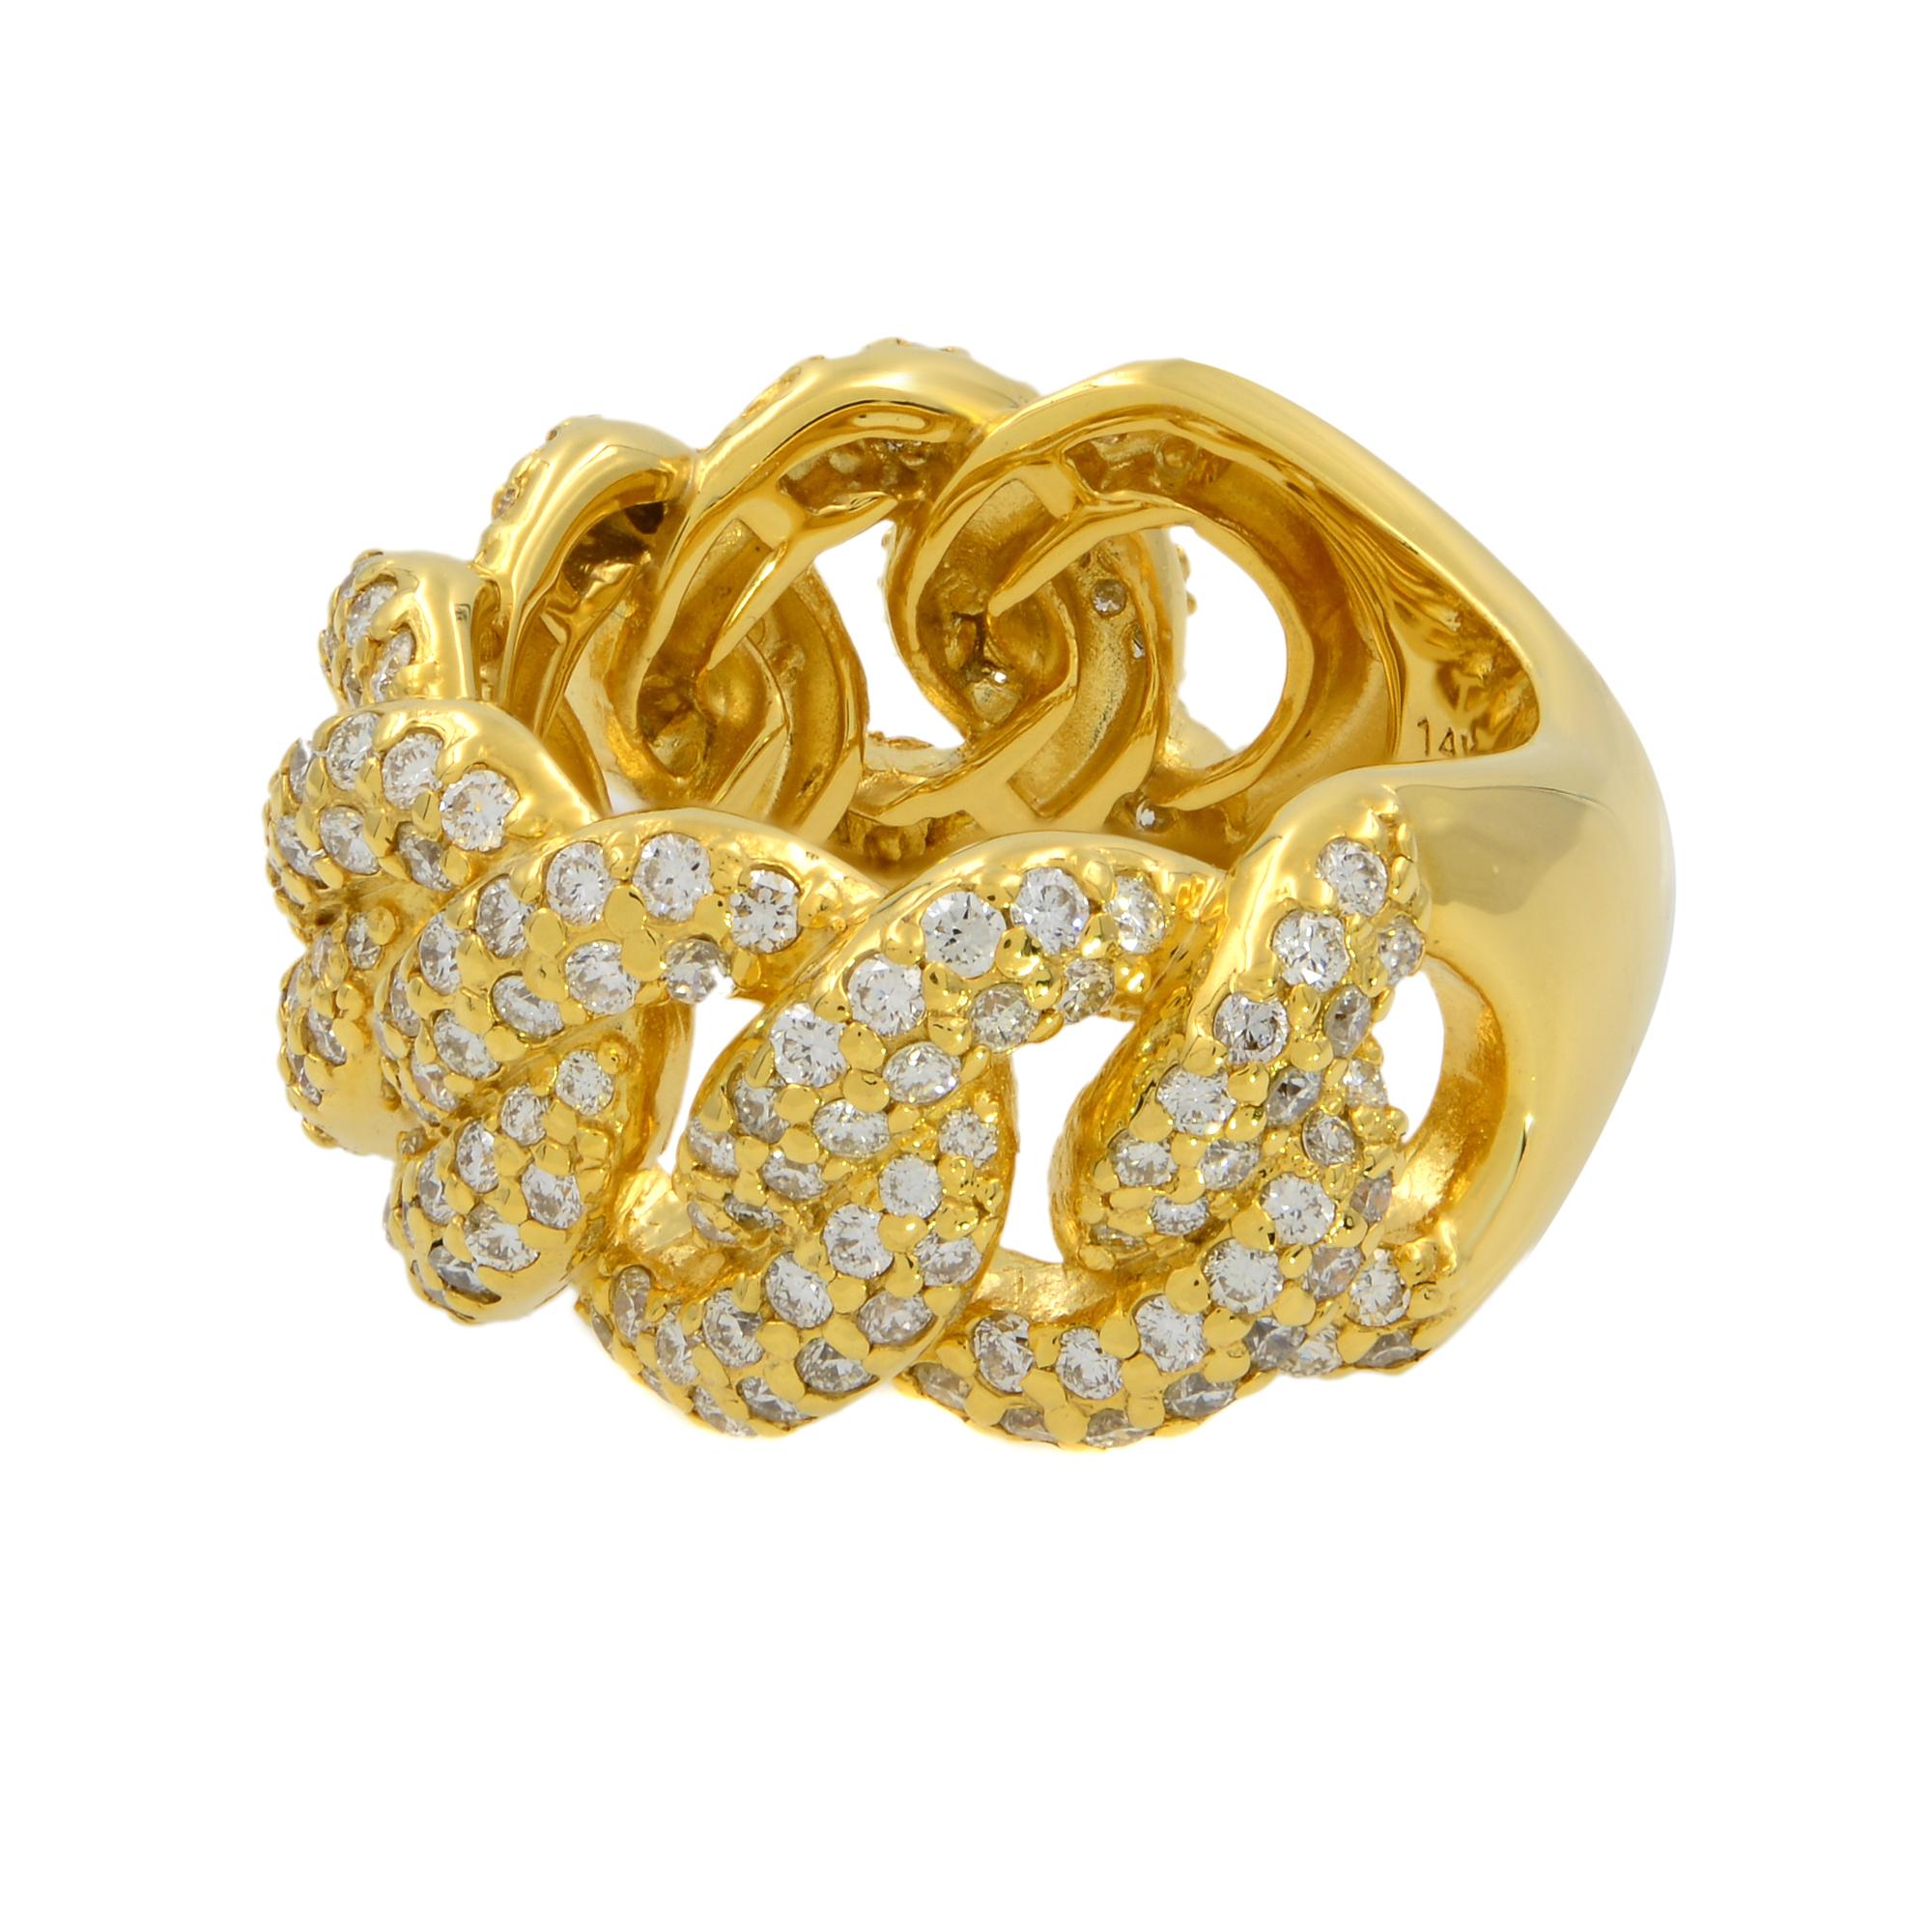 This stunning diamond Cuban link ring weighs approximately 15.3 grams and showcases 2.20 carats of dazzling round cut diamonds. Featuring an incredible design in a 14k yellow gold. This ring is unisex, ring size US 8.5. Diamond quality, color G and